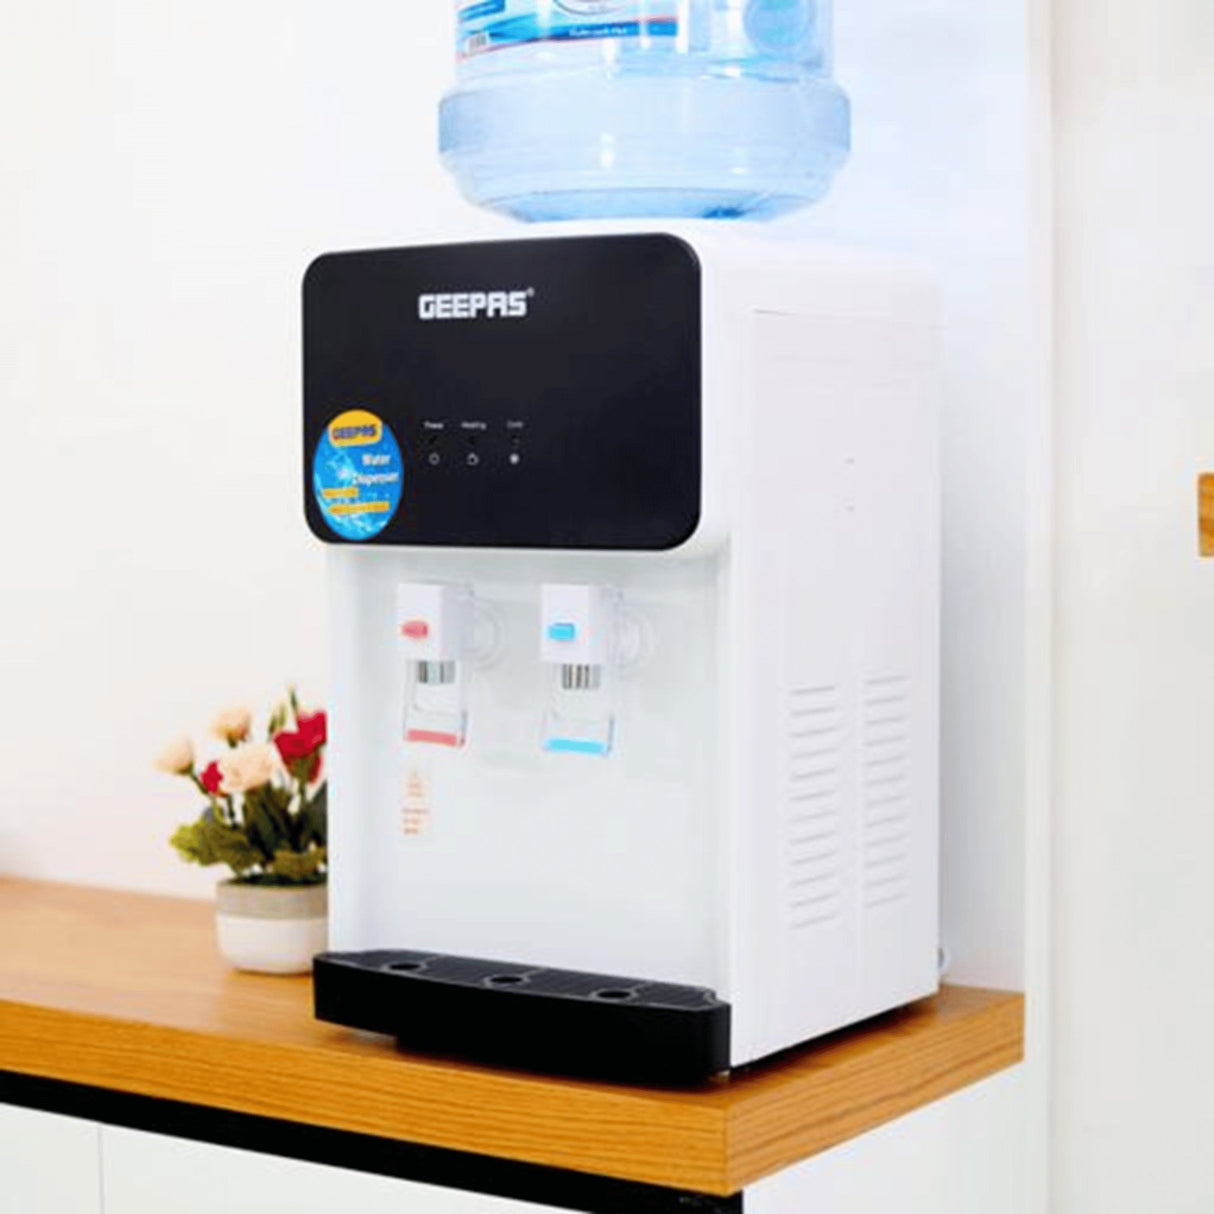 Geepas GWD8356 Table Top Hot & Cold Water Dispenser - White - KWT Tech Mart